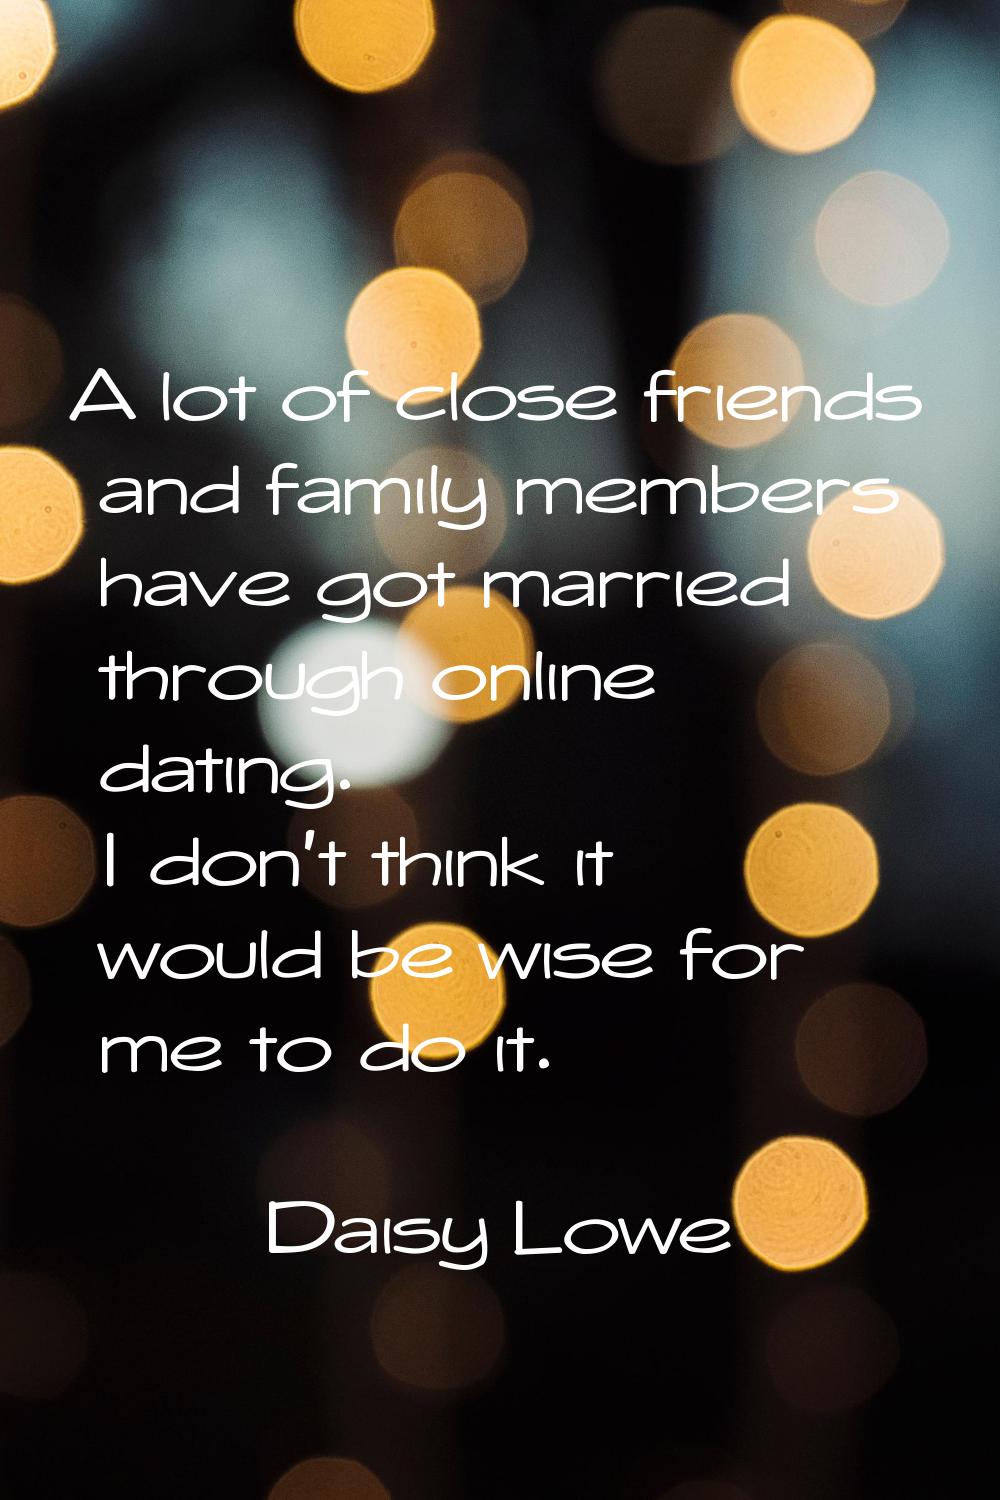 A lot of close friends and family members have got married through online dating. I don't think it 